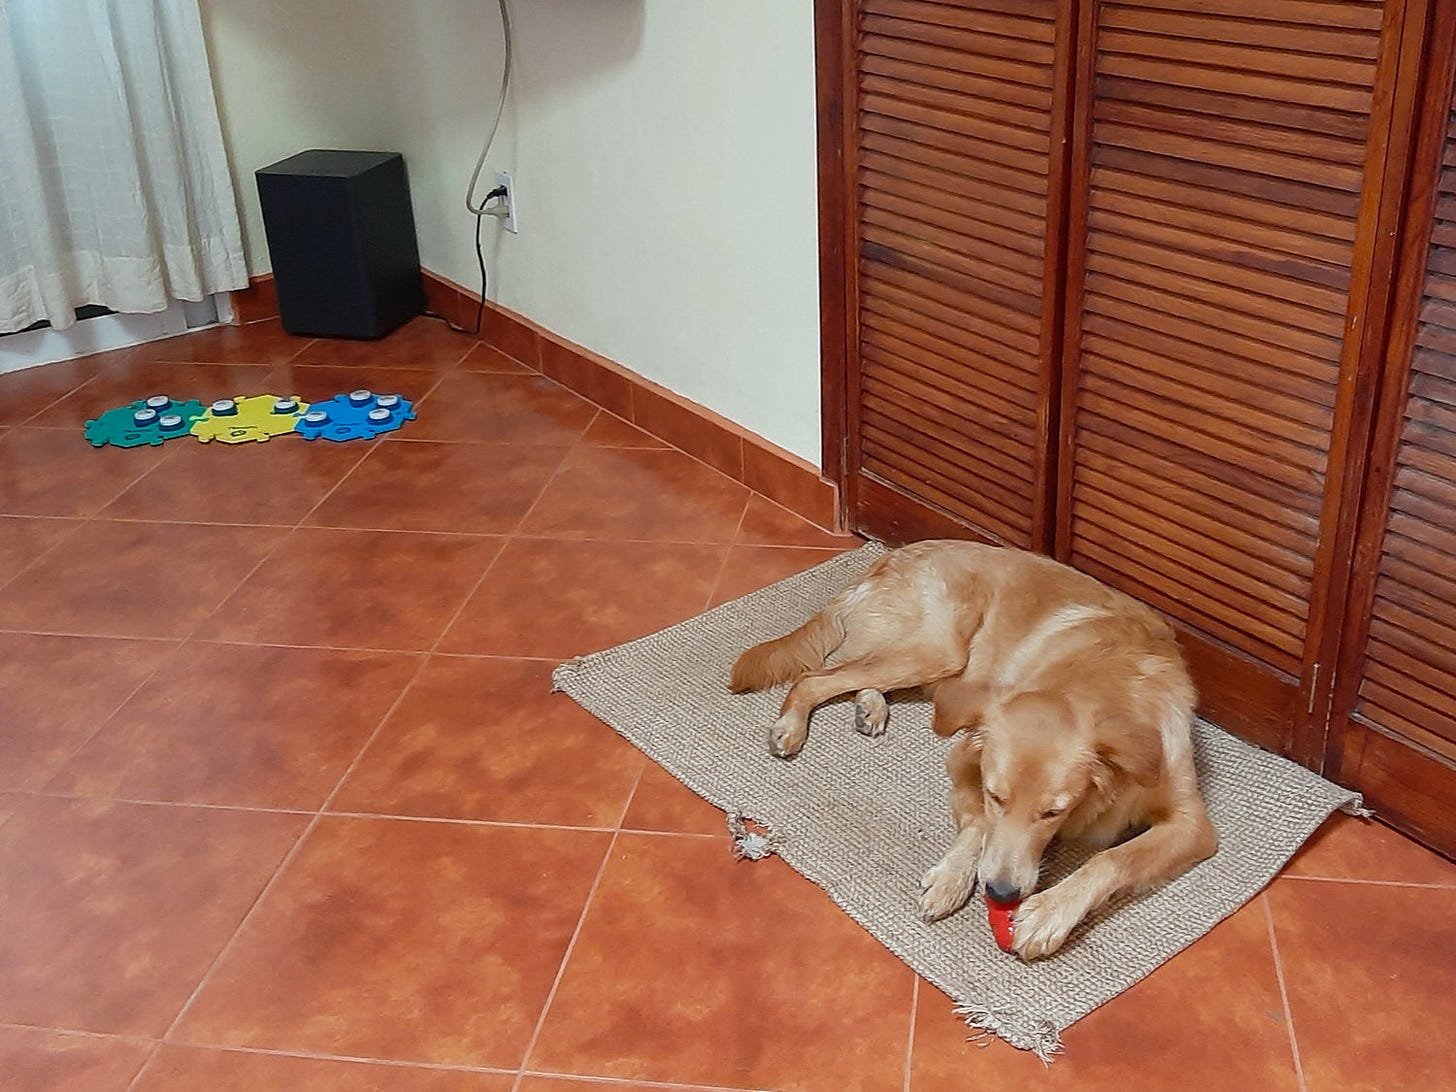 A golden-tan dog lies in front of louvered wooden closet doors on a checkered cream-and-brown rug. He is biting at a red rubber kong that he is holding with one paw; his ears are slightly back, and his gaze is towards the kong. The rug is chewed at various places along the edges. About a meter away across the terra cotta colored tile floor is a pet soundboard of three colored hex-shaped foam tiles: teal, yellow, and sky blue. There are nine buttons with white tops and dark bases attached to the tiles. Behind the soundboard in the corner of the room is a black subwoofer, plugged into a nearby wall outlet.